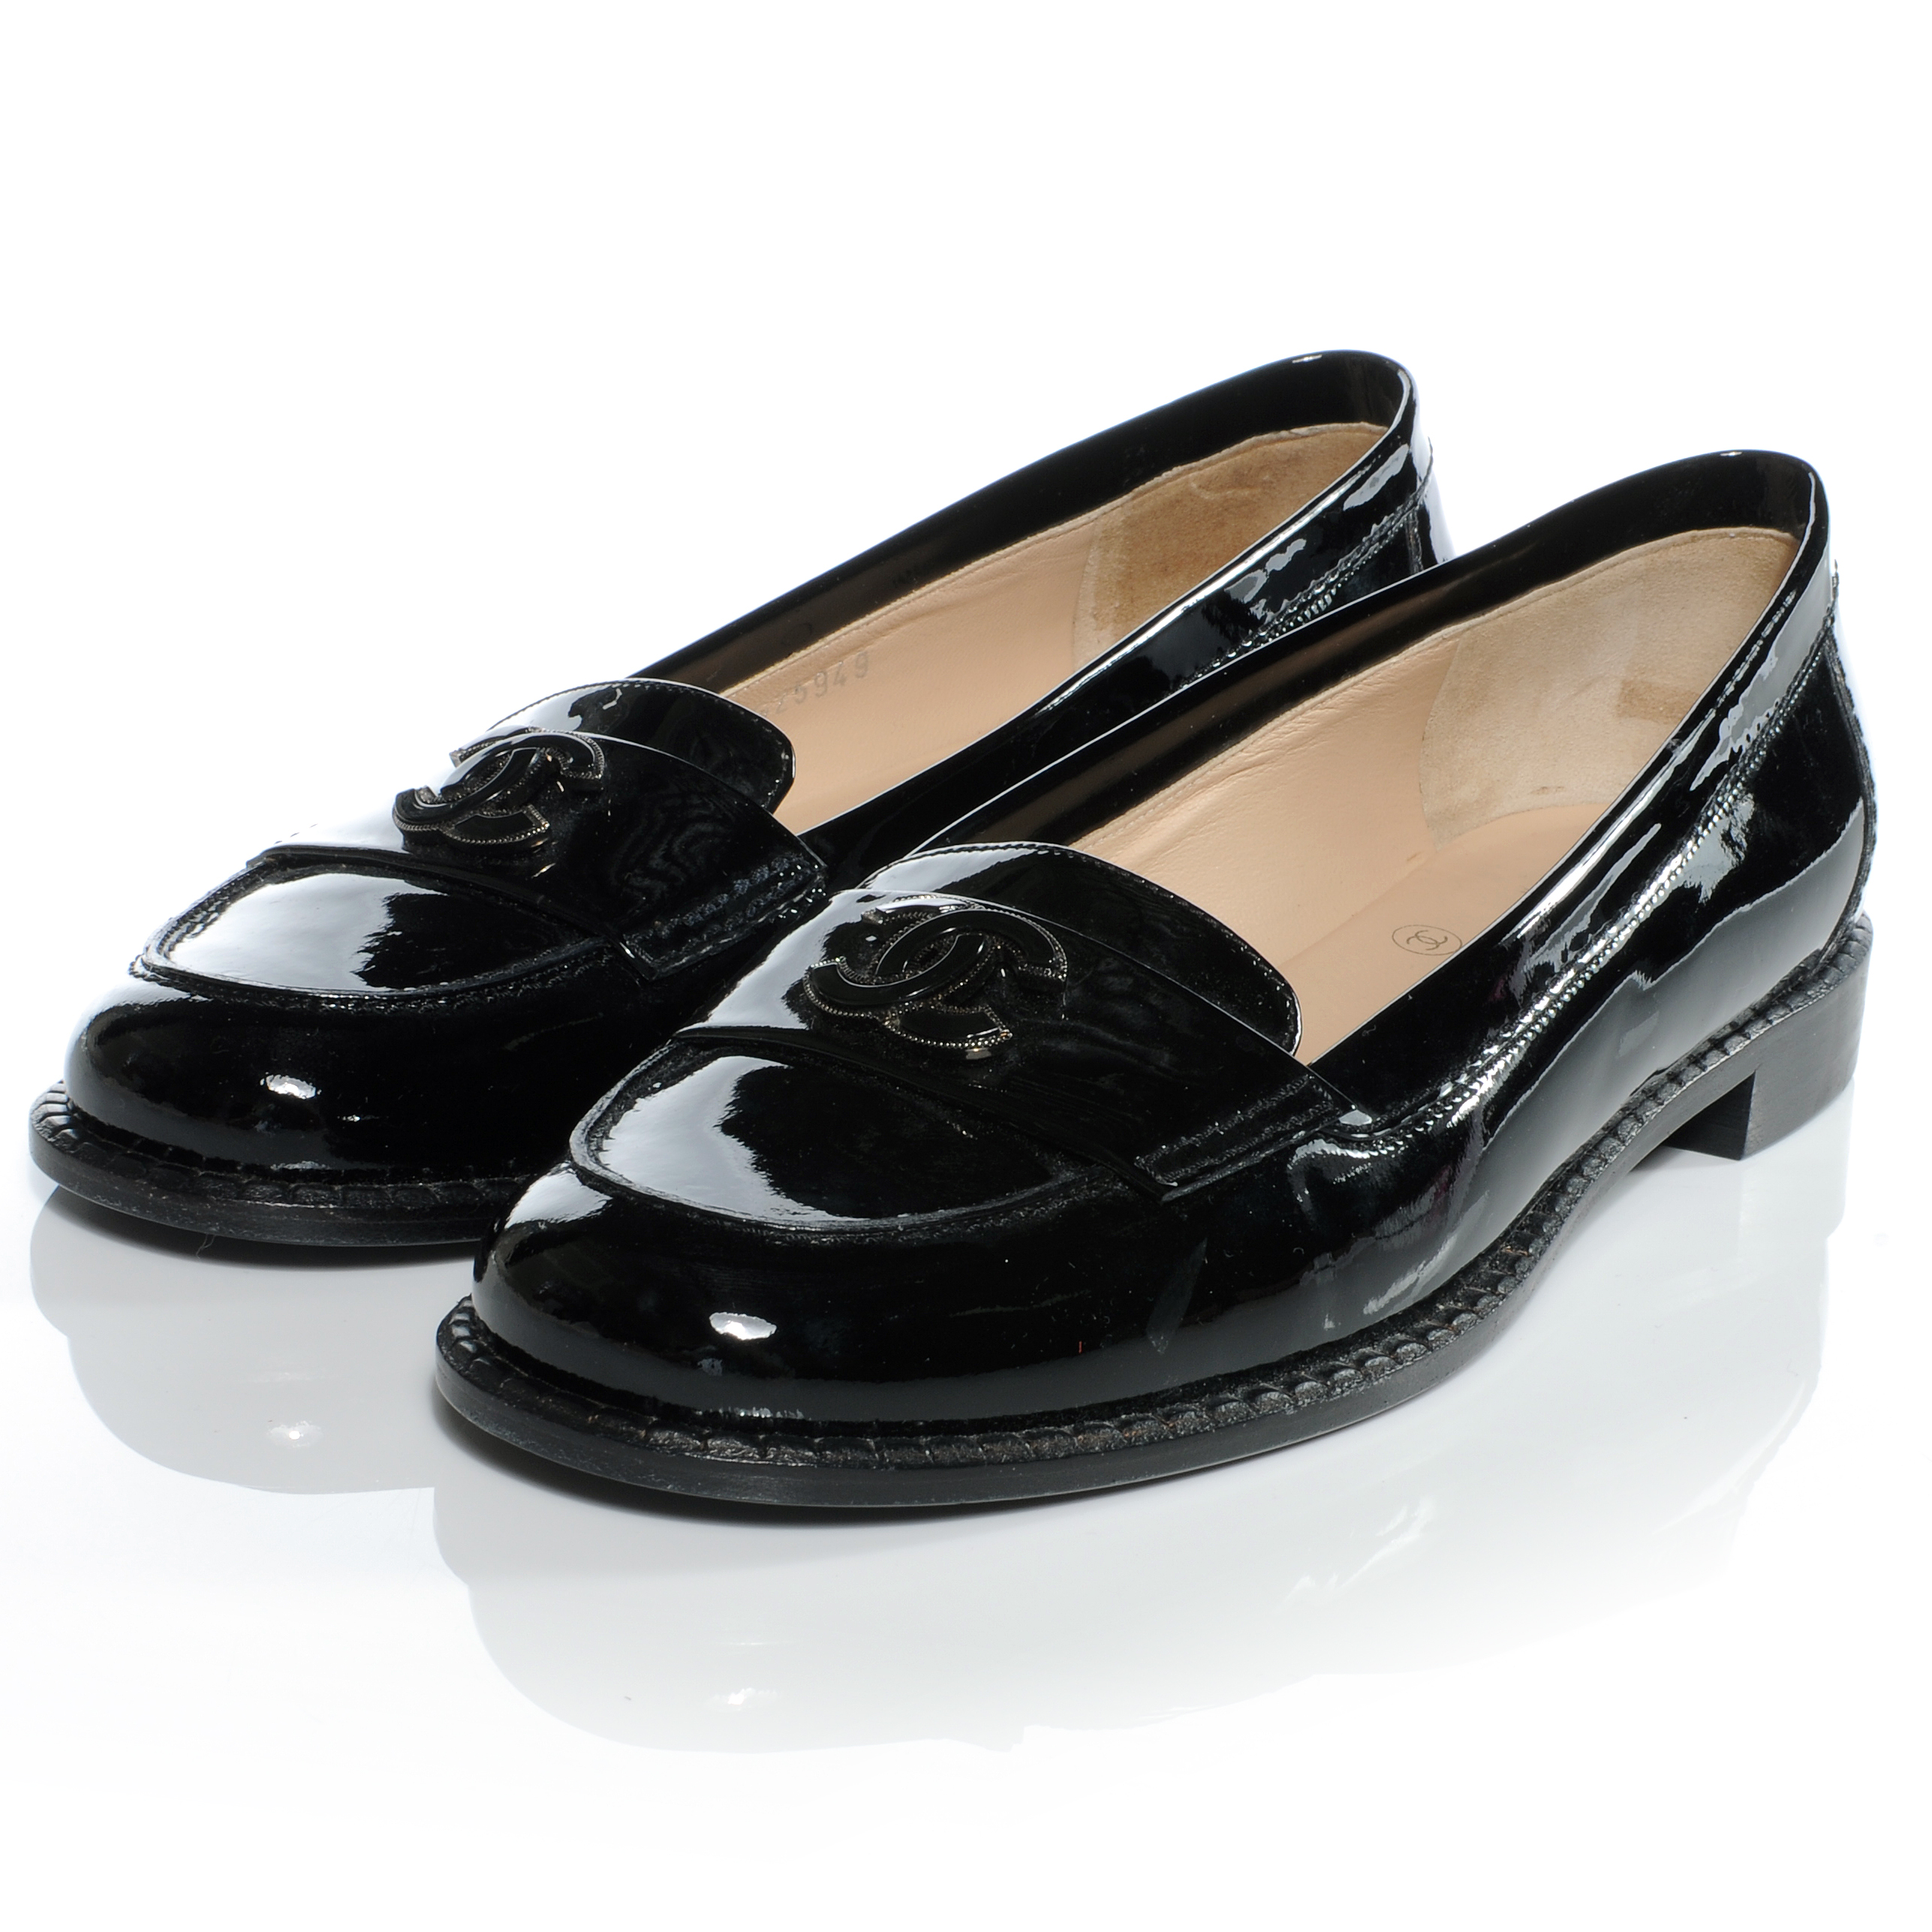 CHANEL Patent Leather Loafers 38.5 